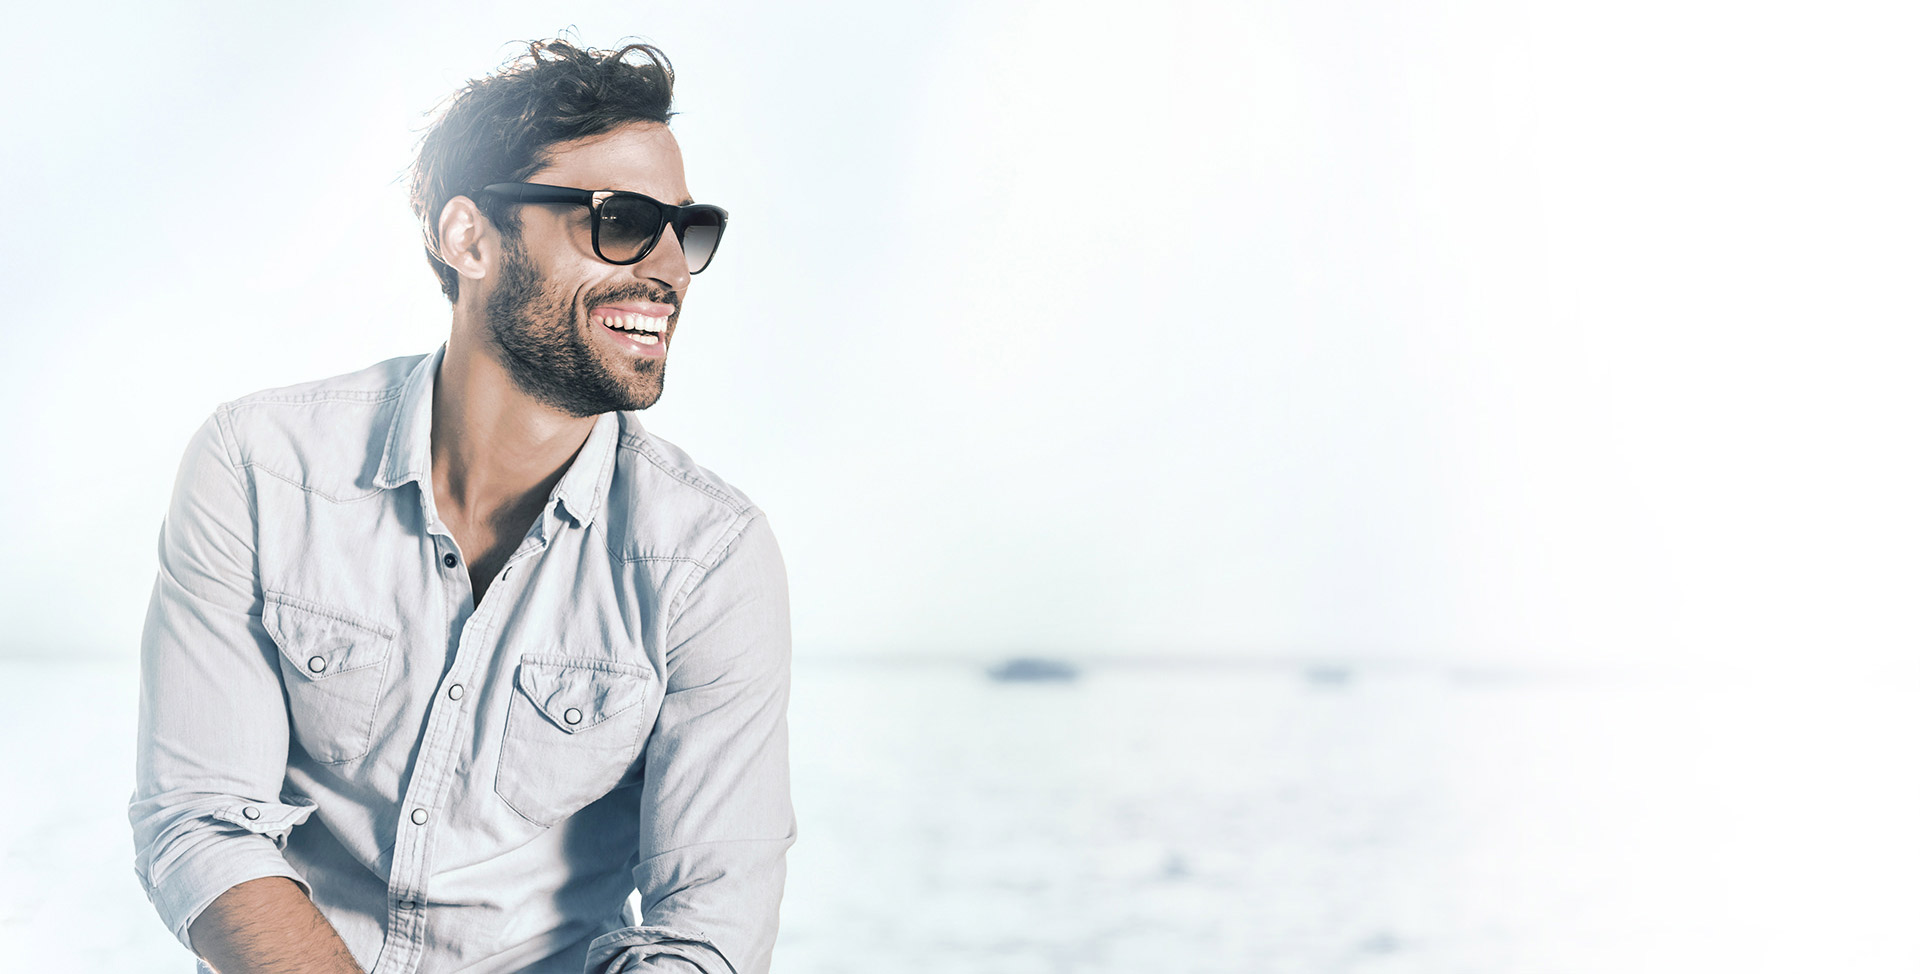 Polarised sunglasses: Comfortable vision without distracting glare.